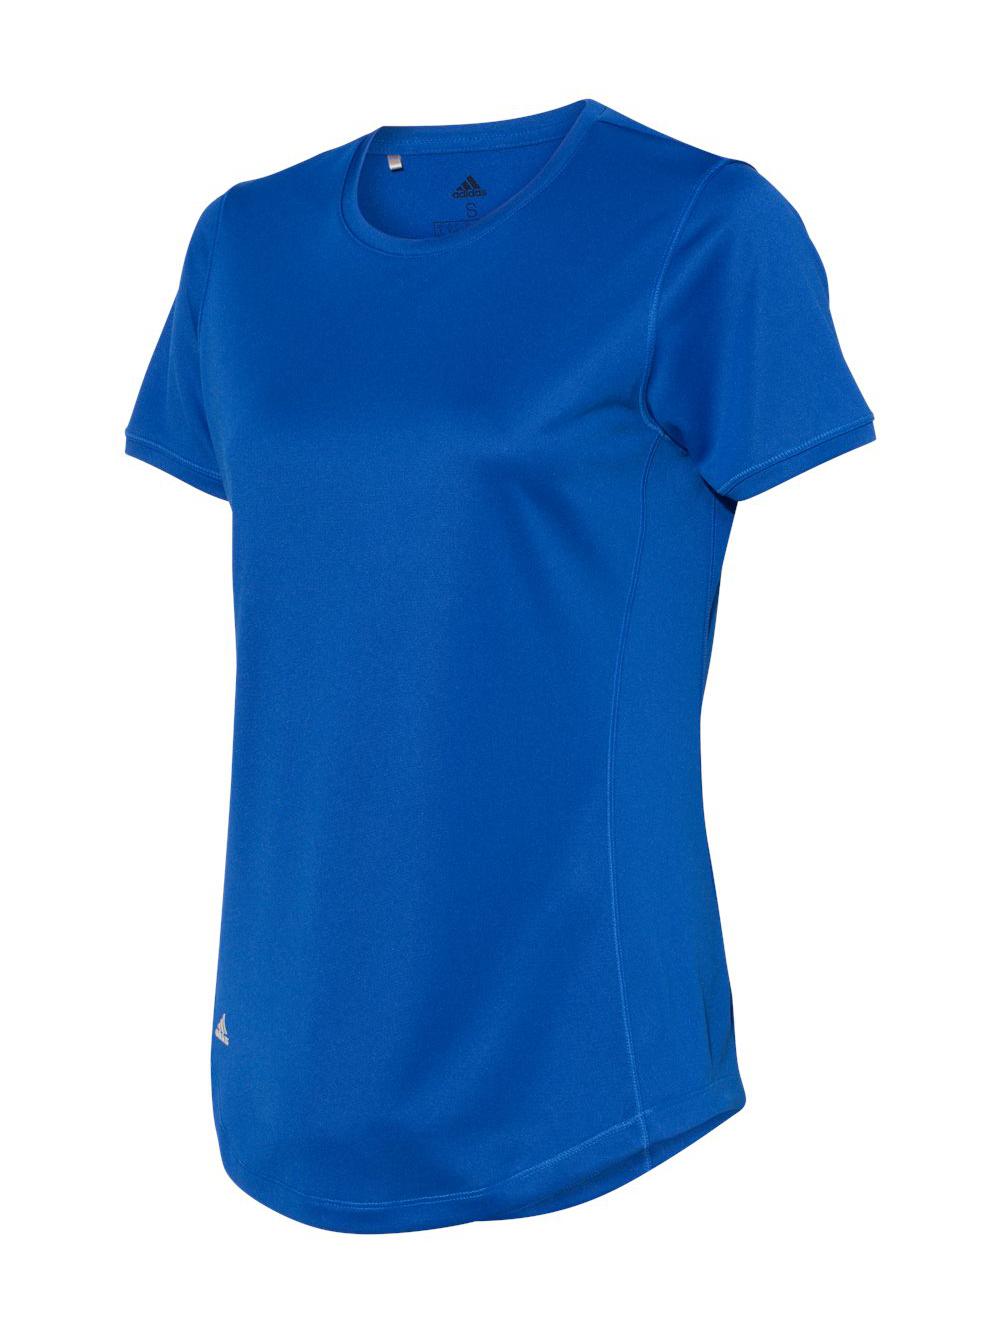 Adidas - Women's Sport T-Shirt - A377 - Collegiate Royal - Size: S - image 1 of 3